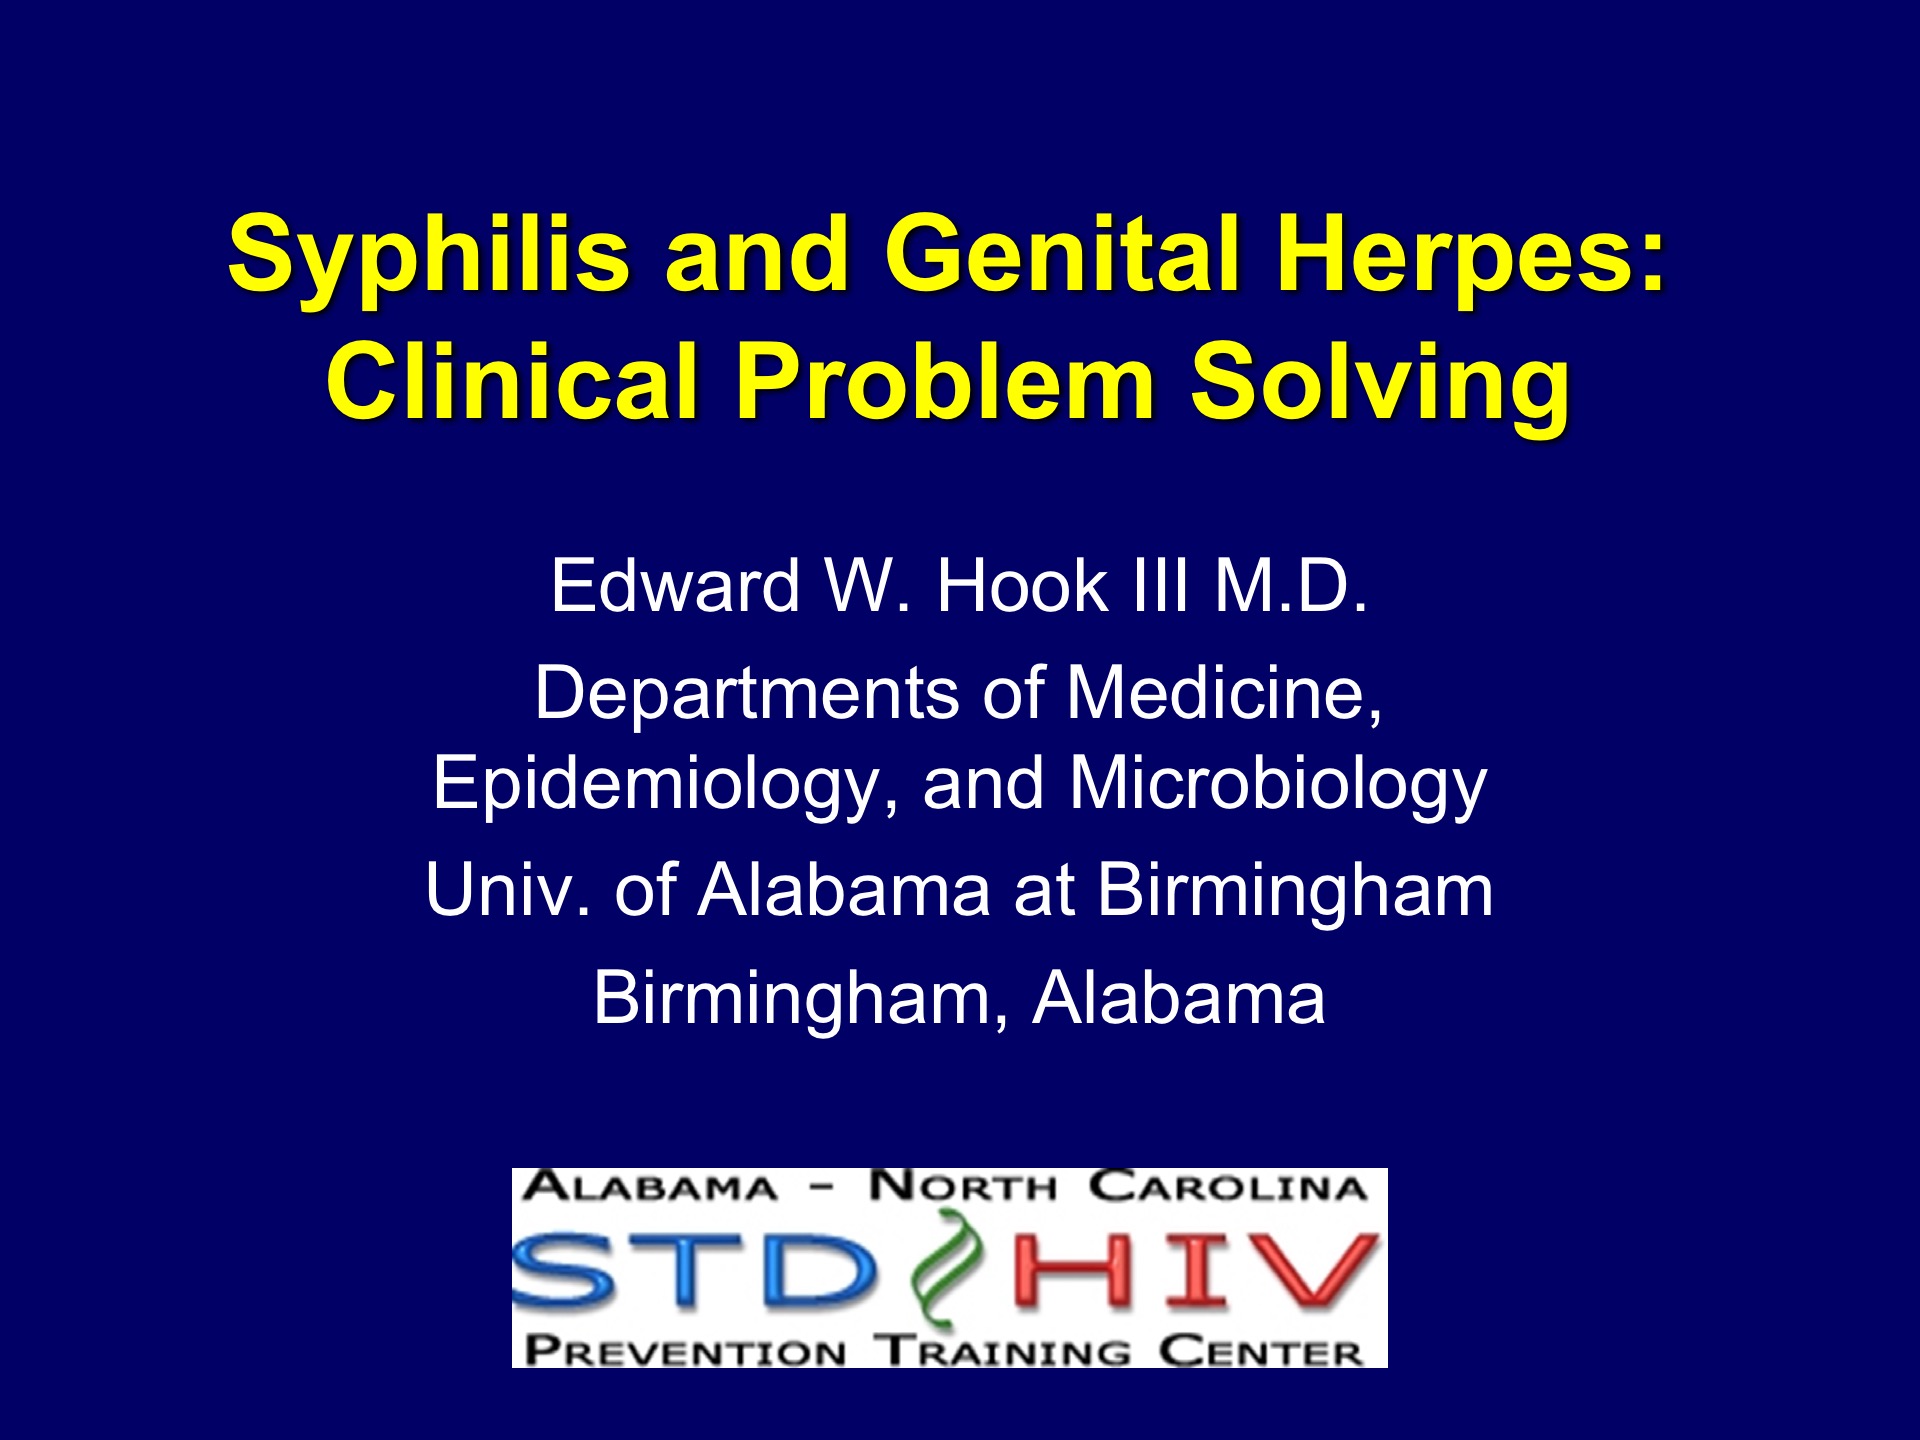 Syphilis and Genital Herpes: Clinical Problem Solving